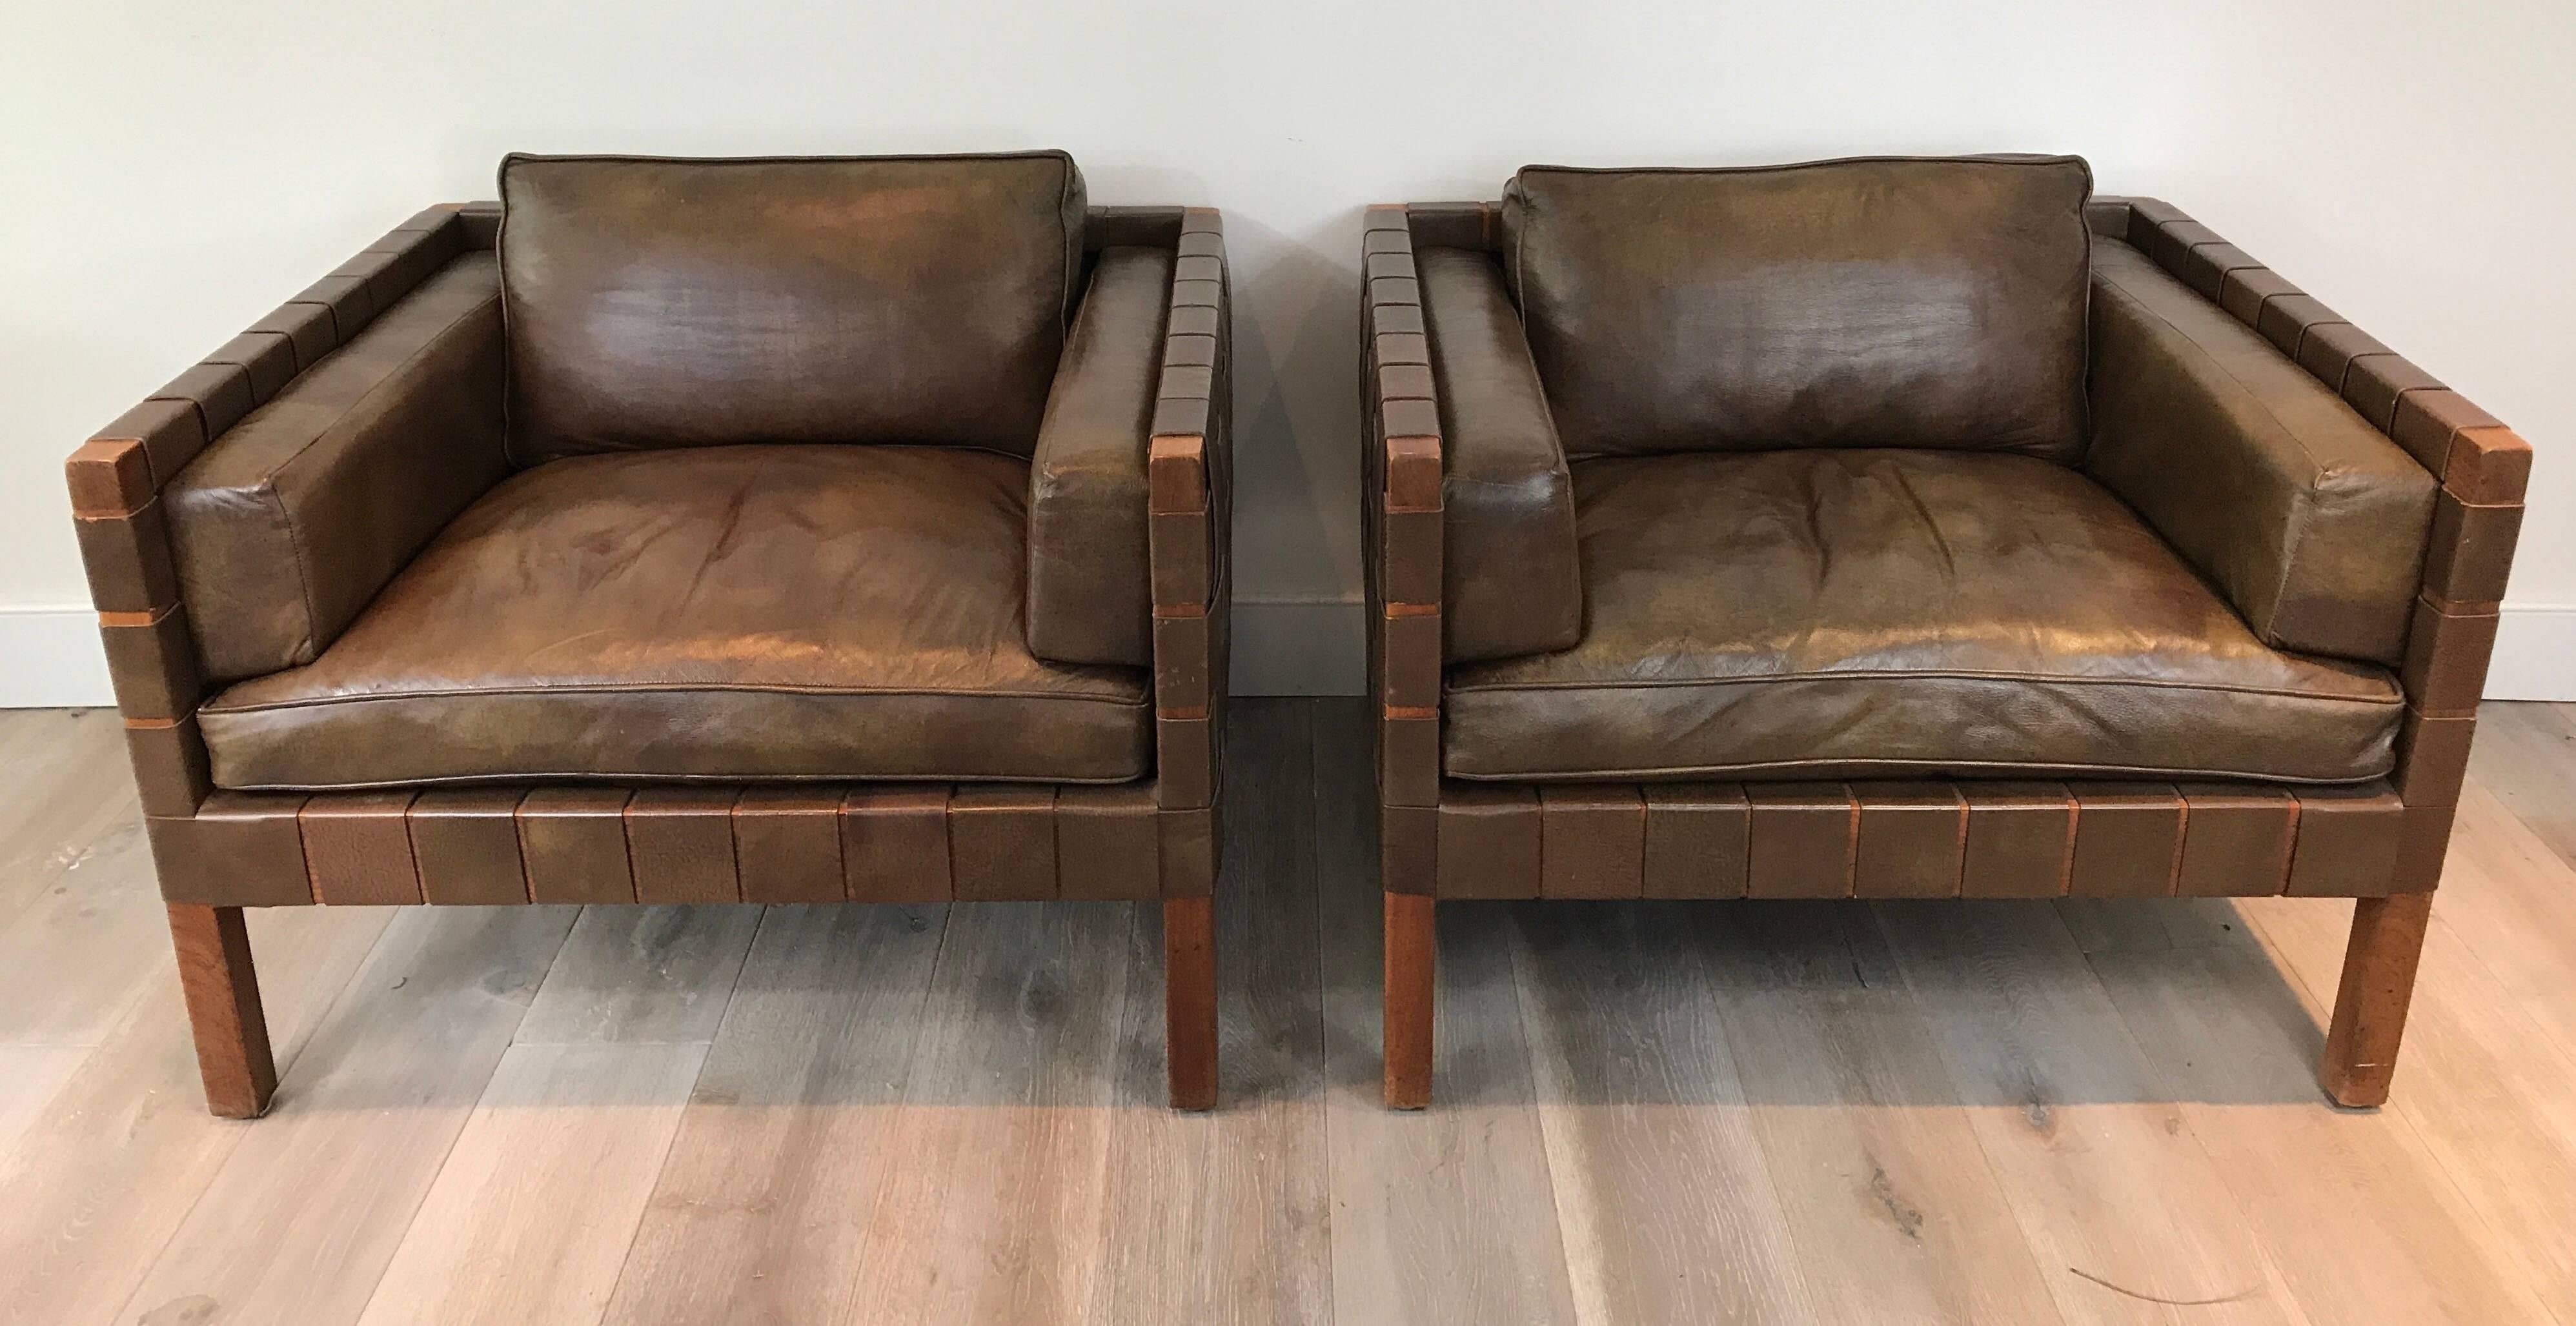 Stunning pair of Danish club chairs with rich brown leather seats and woven leather frame. Large-scale and great proportions.